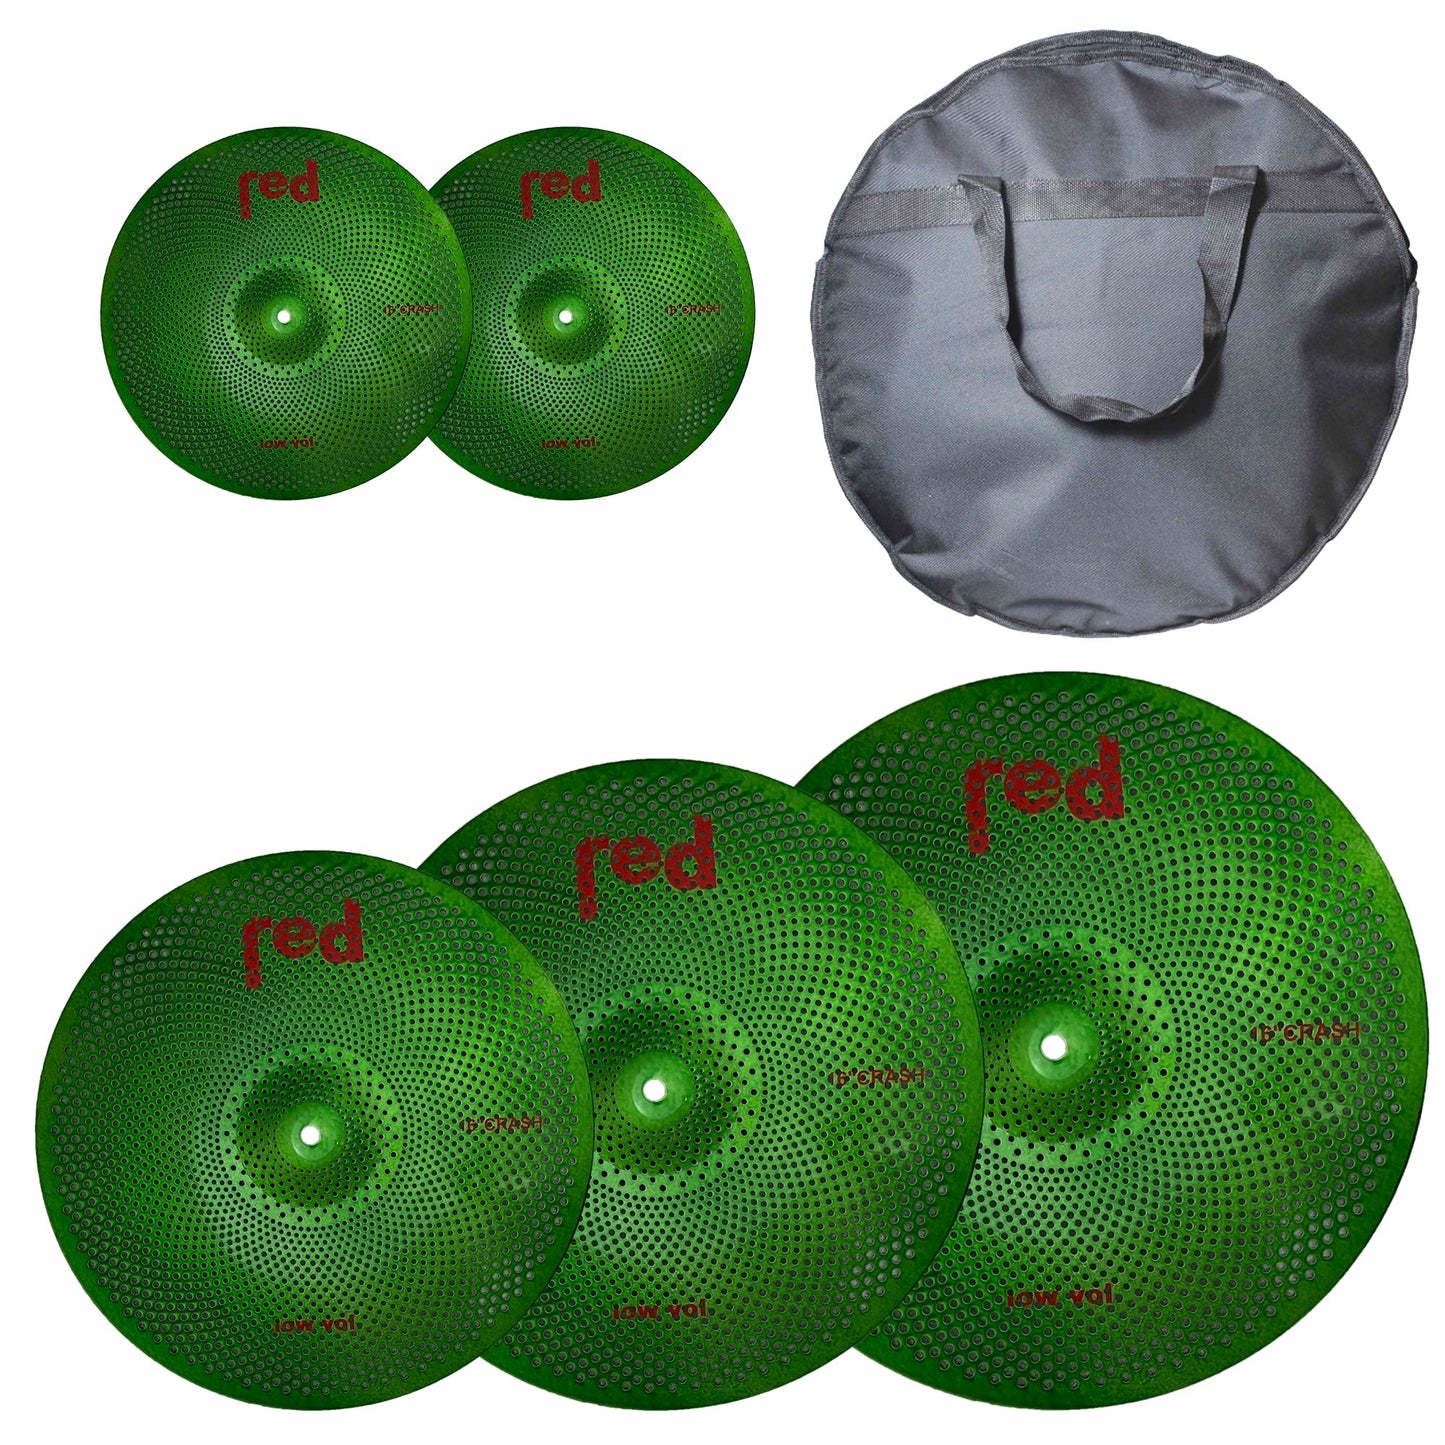 Green Low Volume 5 piece Cymbal Set with free 20" Bag